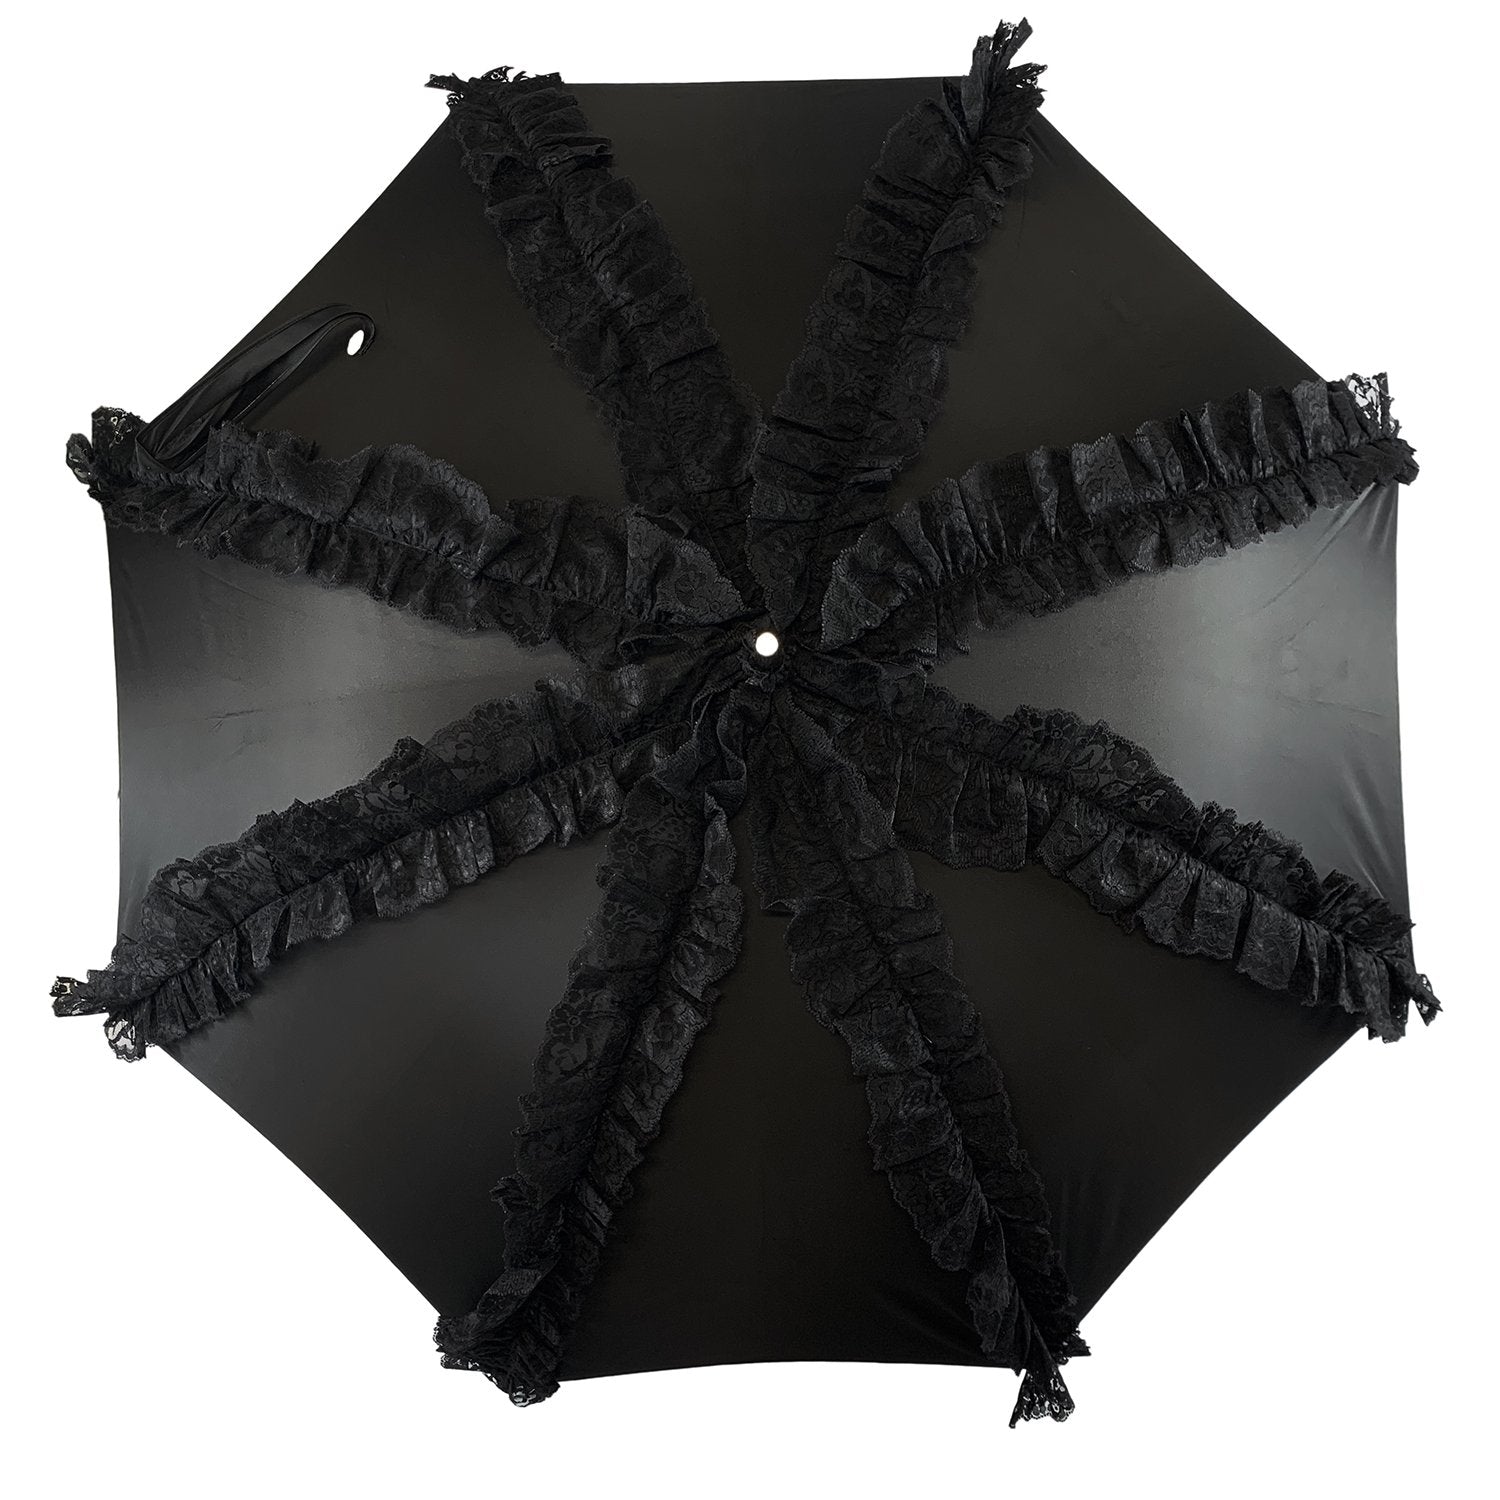 Limited collection - umbrella with Black lace - exclusive "ilMarchesato" - IL MARCHESATO LUXURY UMBRELLAS, CANES AND SHOEHORNS